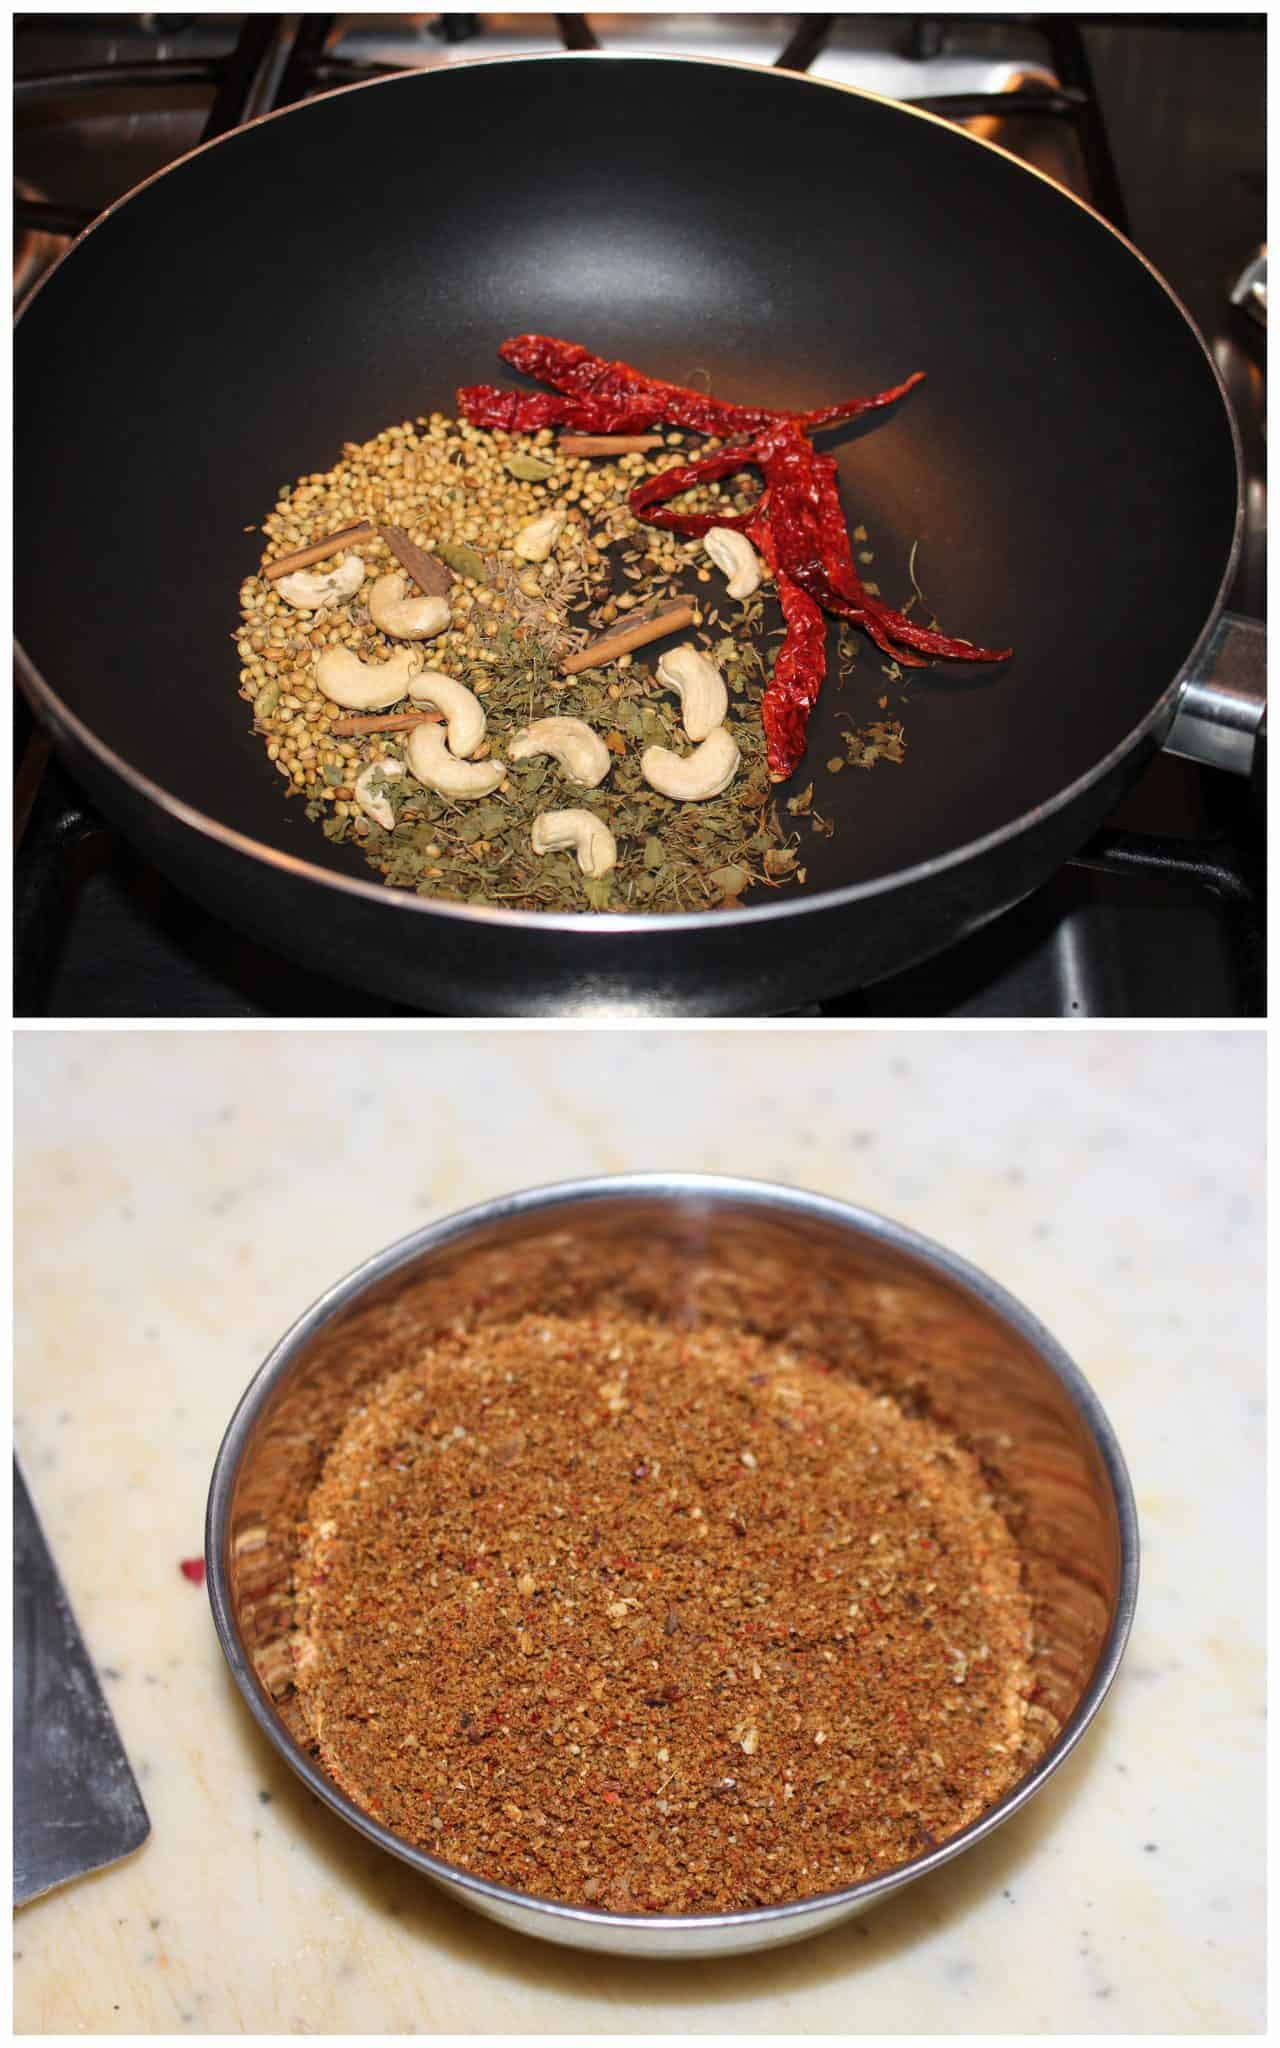 Roasting dry spices